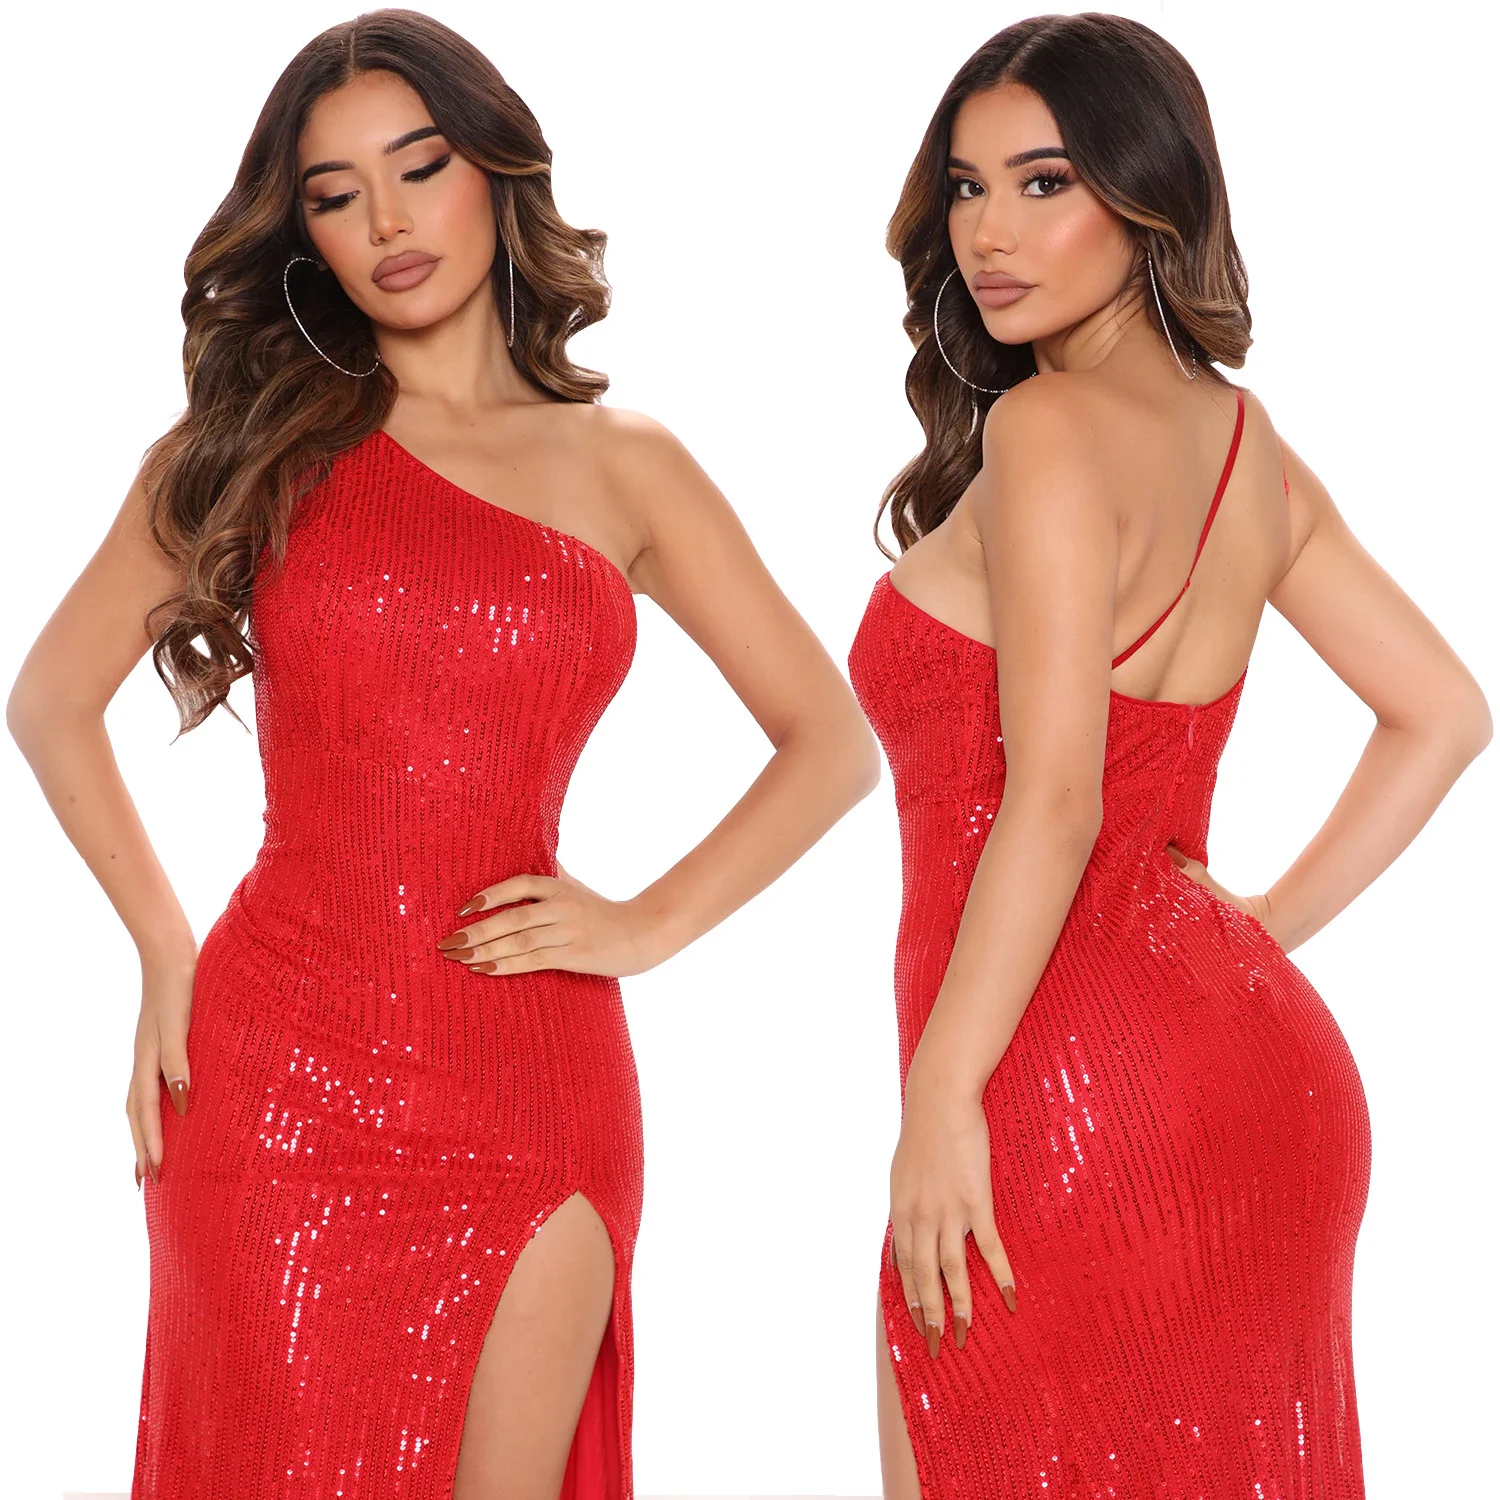 Dresses Sequin Beaded Dress Women Summer Women's Outfit Fashion Sexy Off Shoulder Lady Girls Vestidos Sleeveless Outfits